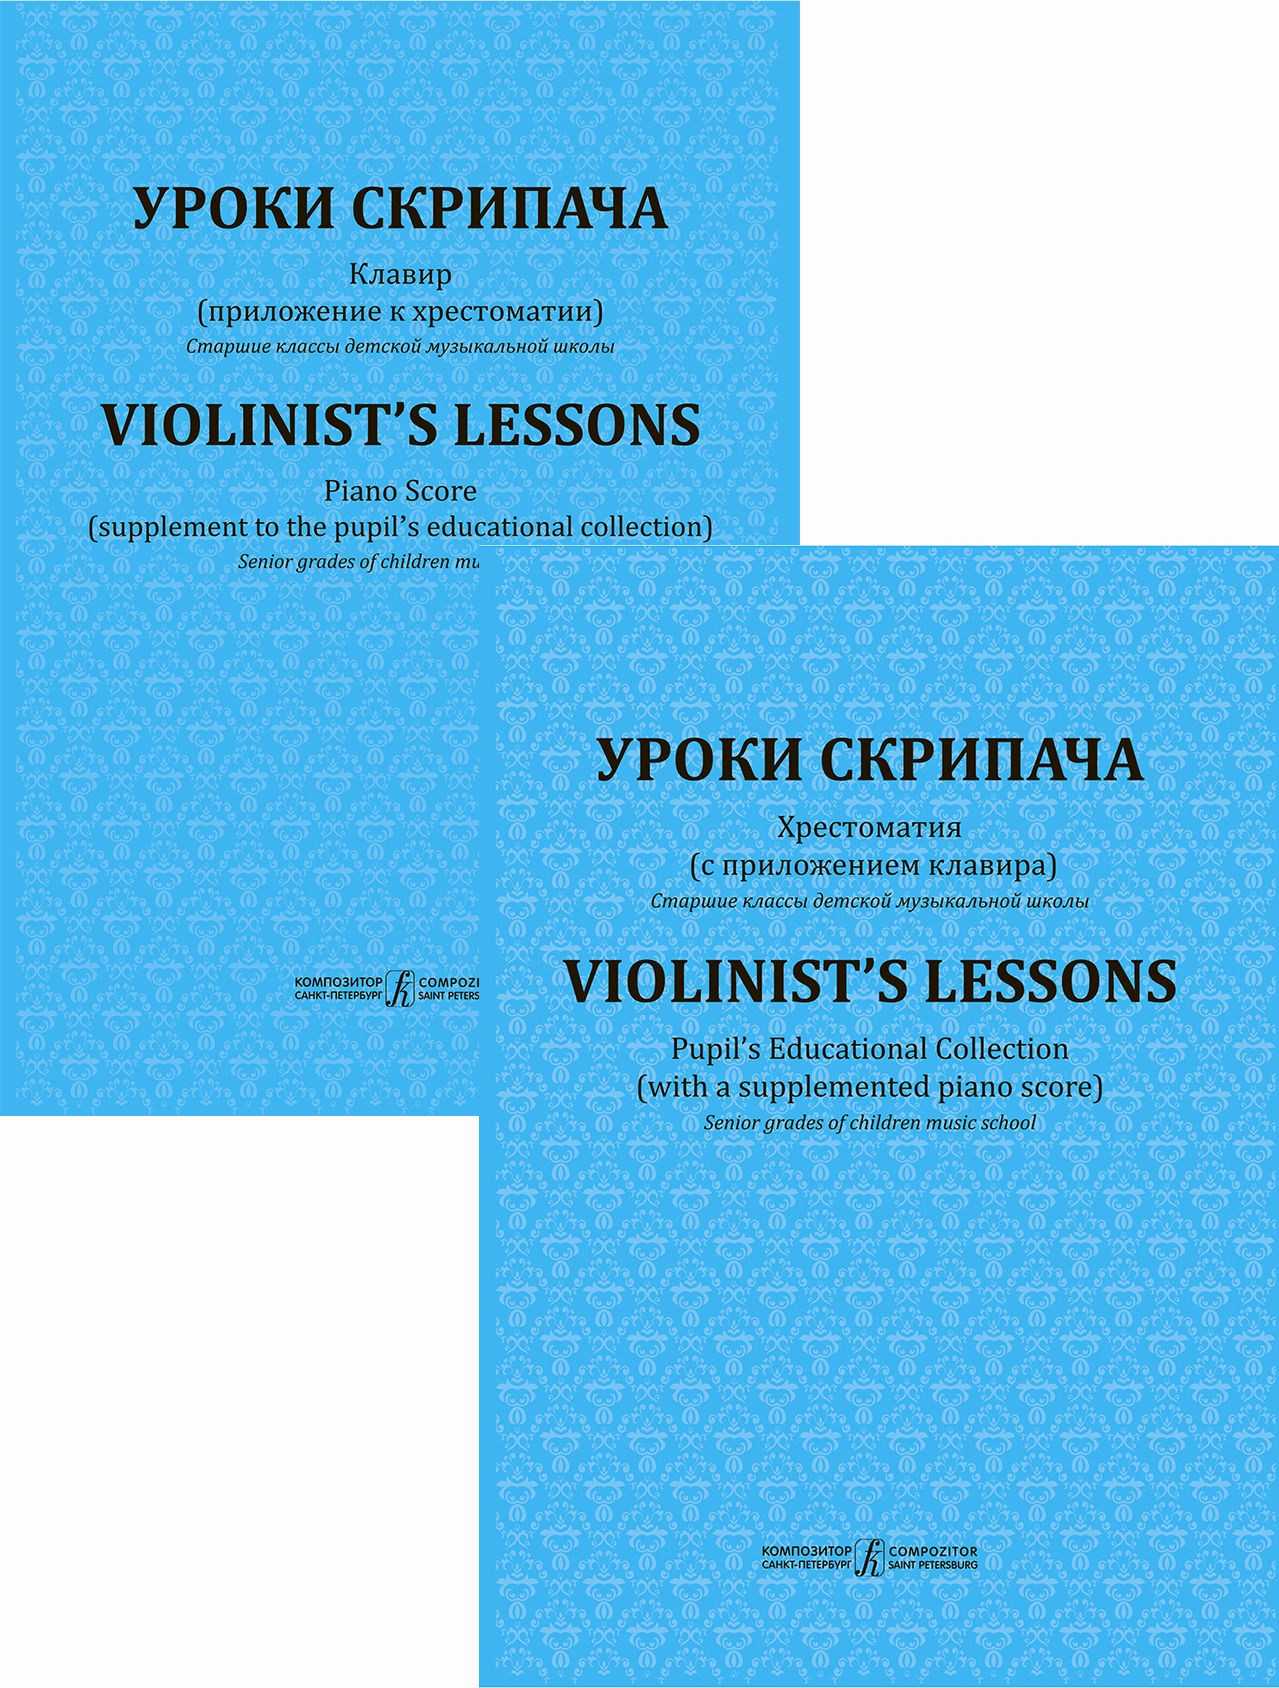 Violinist’s  Lessons. Pupil's Educational Collection